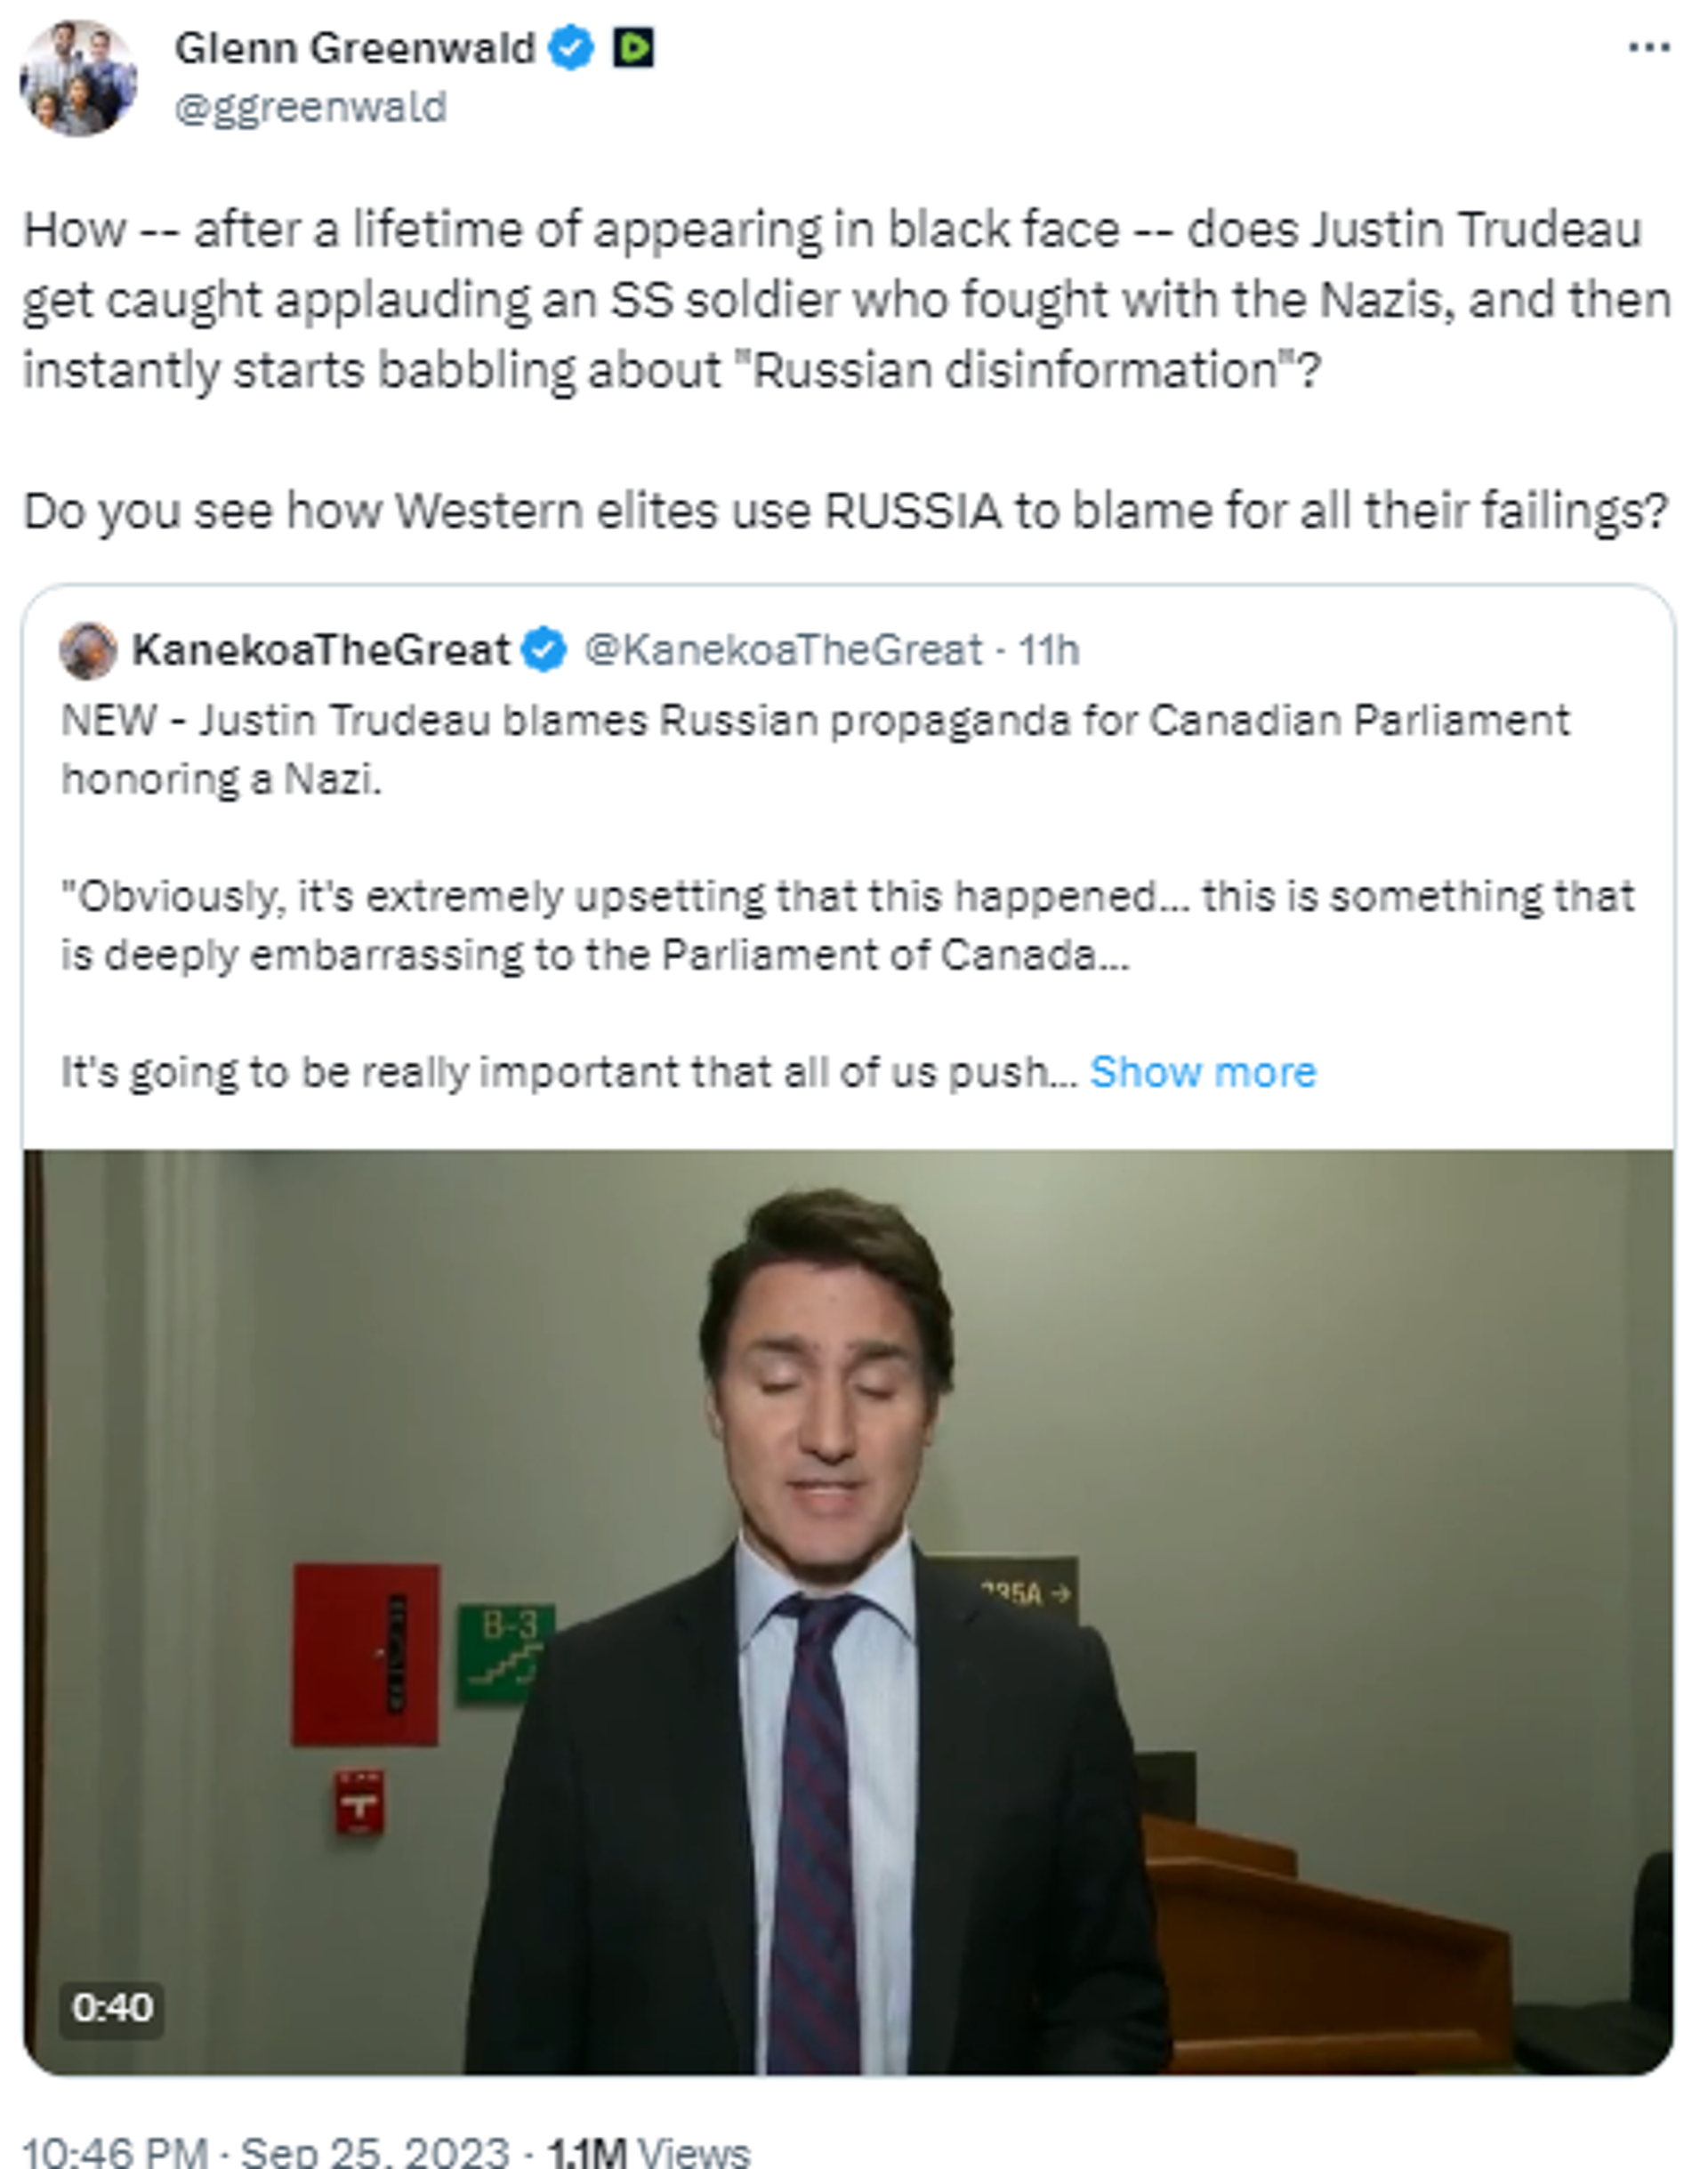 Screenshot of X post by American journalist Glenn Greenwald featuring link to footage of Prime Minister Justin Trudeau blaming Russian disinformation for a Ukrainian Nazi veteran being honored in the Canadian parliament. - Sputnik International, 1920, 26.09.2023